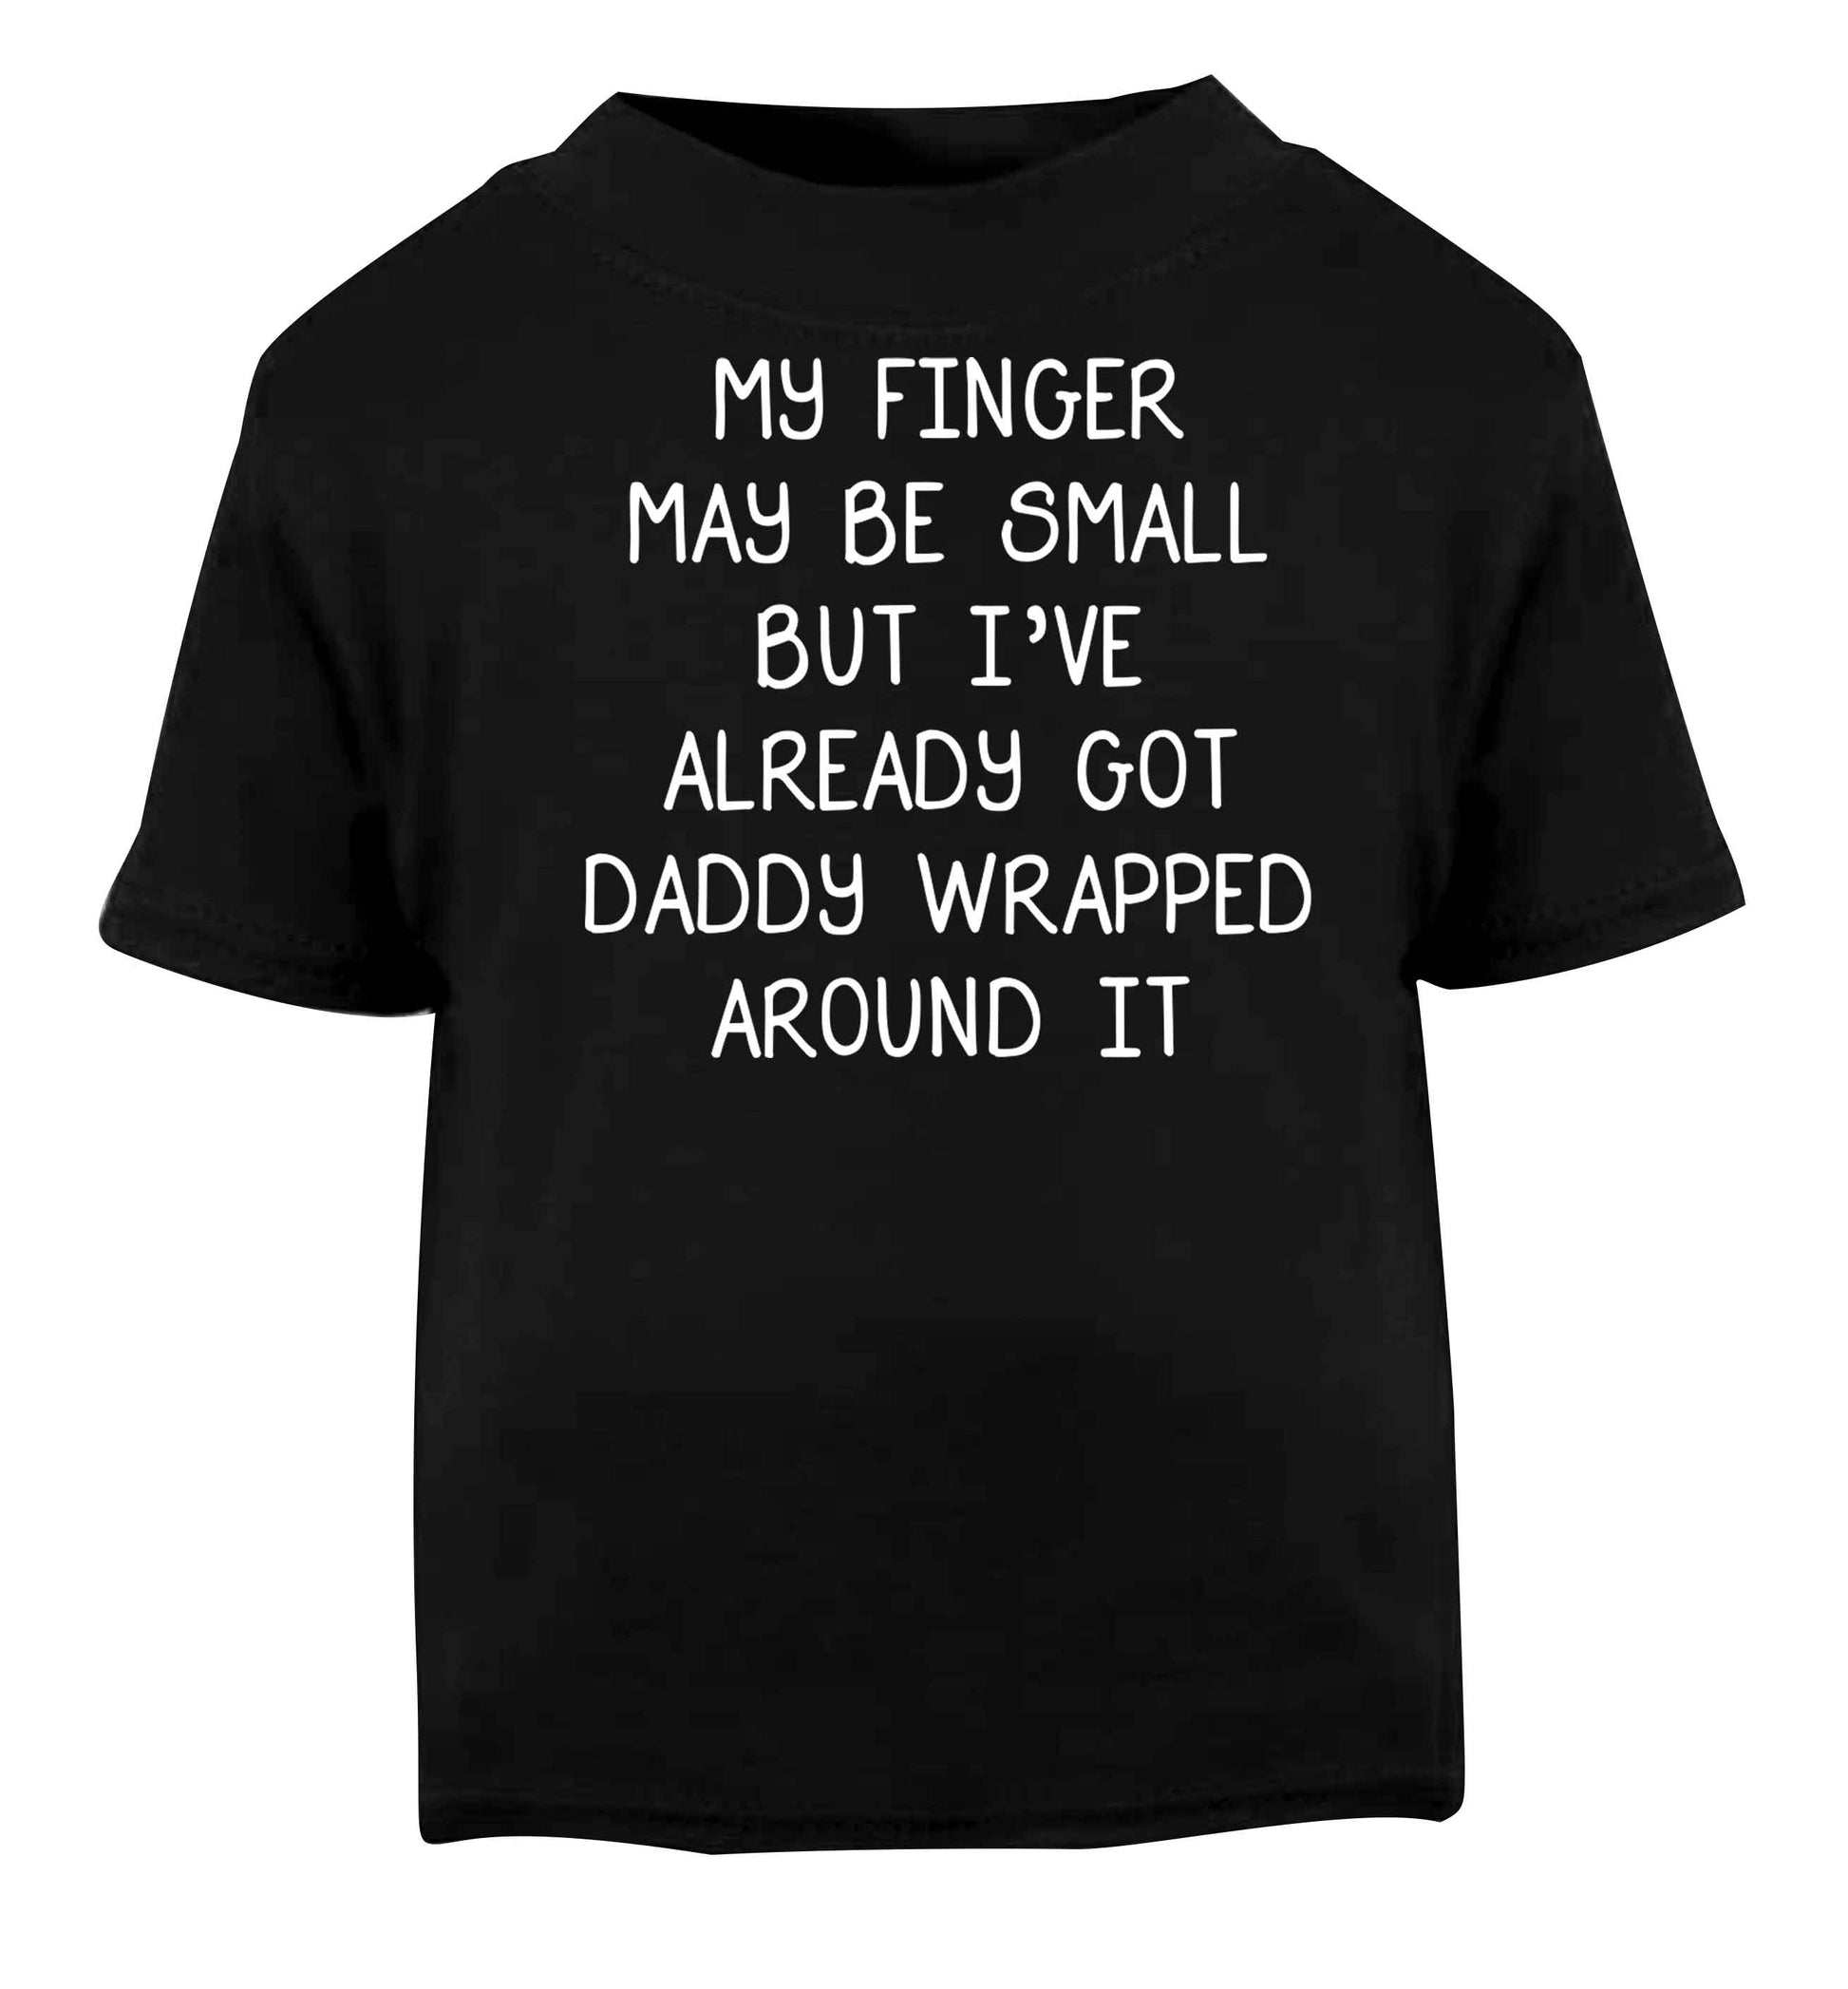 My finger may be small but I've already got daddy wrapped around it Black baby toddler Tshirt 2 years